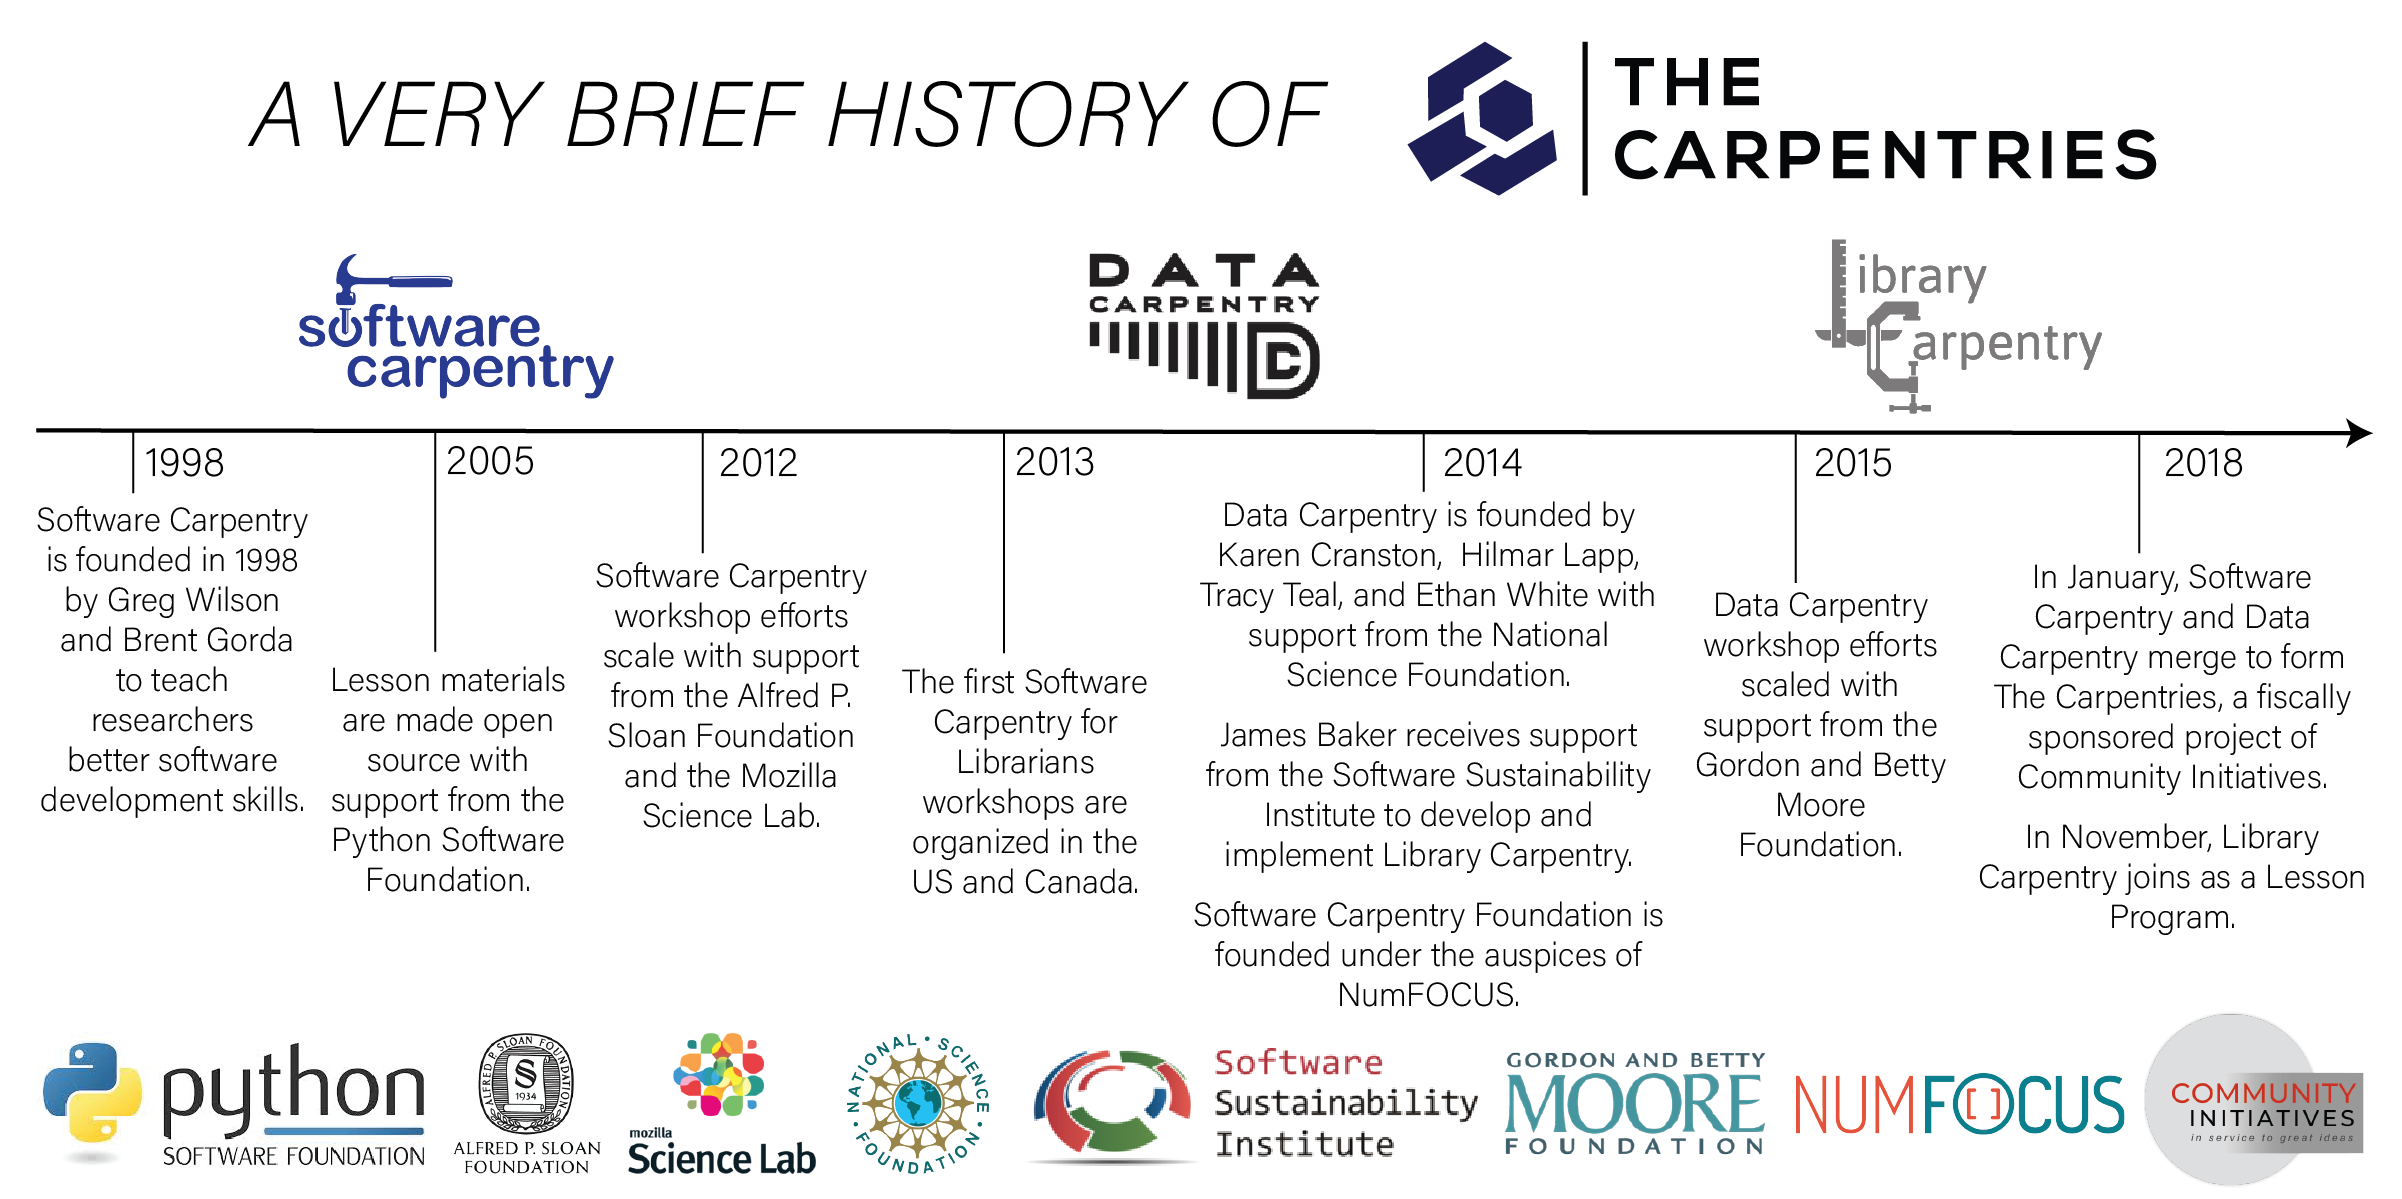 A very brief history of The Carpentries. A timeline - 1998 Software Carpentry is founded by Greg Wilson and Bret Gorda to teach researchers better software development skills. 2005 lesson materials are made open source with support from the Python Software Foundation. 2012 Software Carpentry workshop efforts scale with support from the Alfred P. Sloan Foundation and the Mozila Science Lab. 2013 the first Software Carpentry for Librarians workshops are organised in the US and Canada. 2014 Data Carpentry is founded by Karen Cranston, Hilmar Lapp, Tracy Teal, and Ethan White with support from the National Science Foundation. James Baker receives support from the Software Sustainability Institute to develop and implement Library Carpentry. Software Carpentry Foundation is founded under the auspices of NumFOCUS. 2015 - Data Carpentry workshop efforts scaled with support from the Gordon and Betty Moore Foundation. 2018 in January, Software Carpentry and Data Carpentry merge to form The Carpentries, a fiscally sponsored project of Community Initiatives. In November, Library Carpentry joins as a Lesson Program.